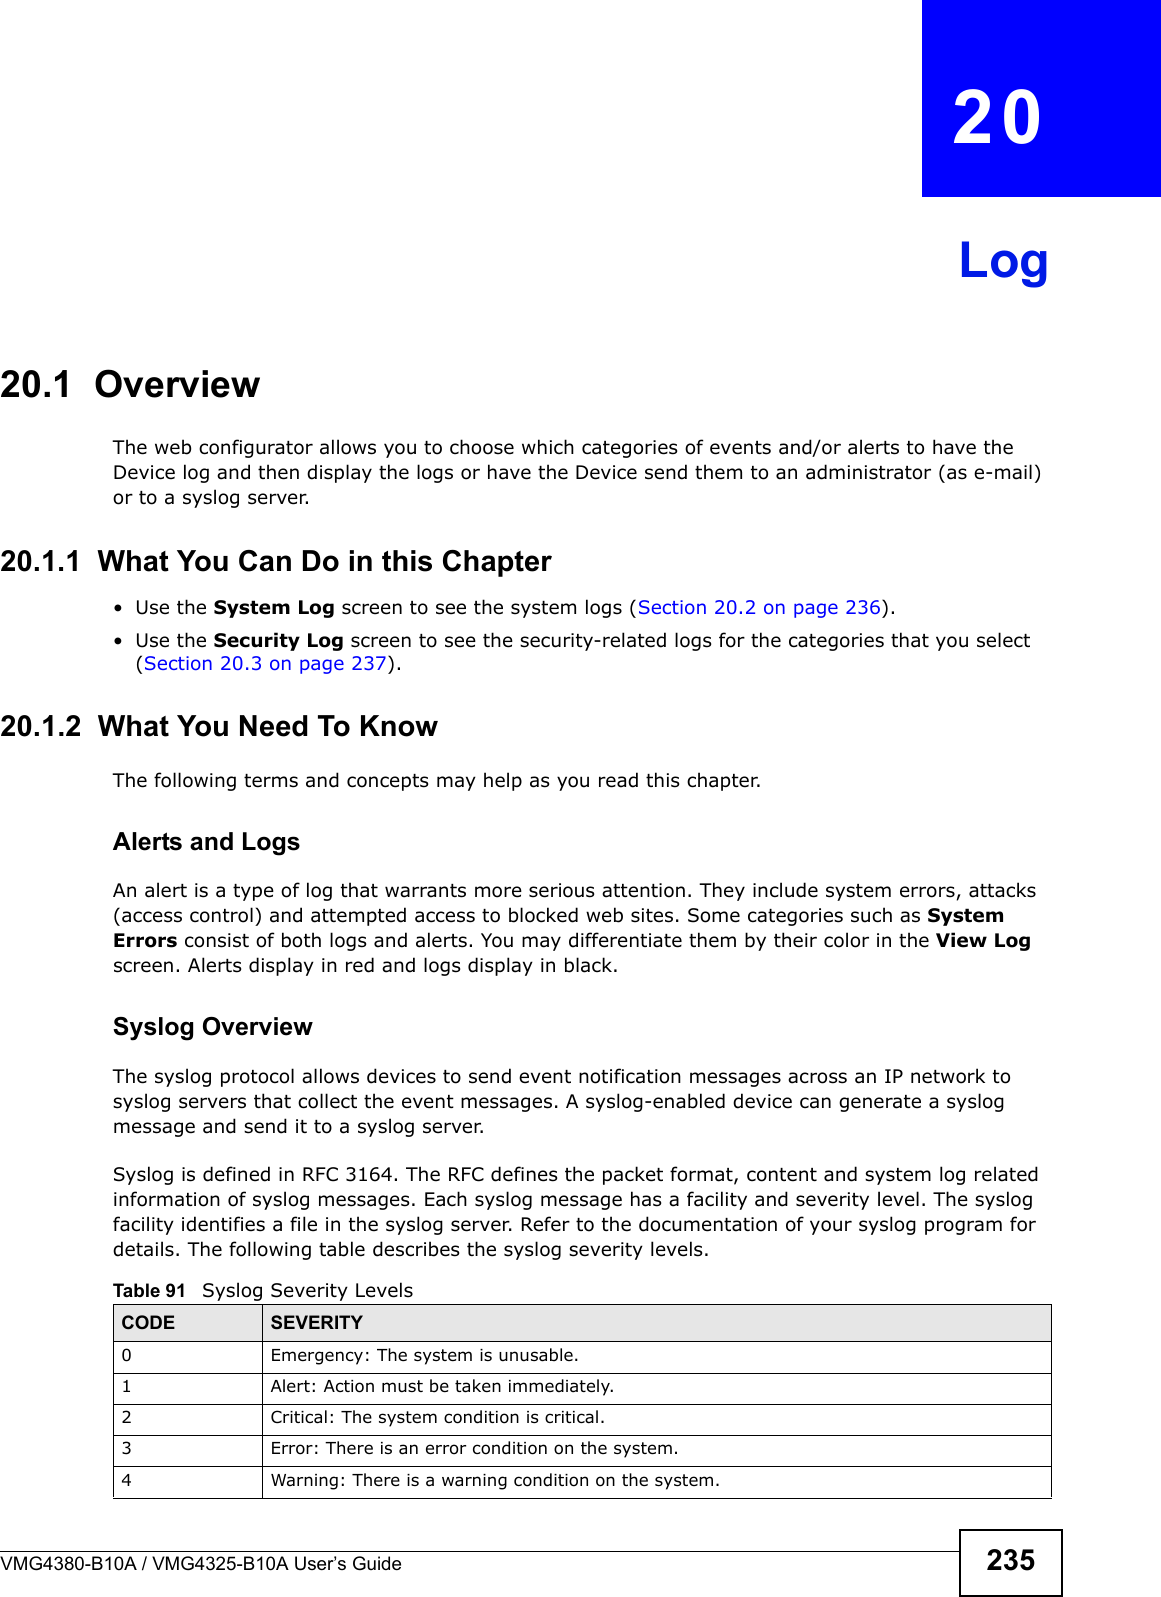 VMG4380-B10A / VMG4325-B10A User’s Guide 235CHAPTER  20Log20.1  OverviewThe web configurator allows you to choose which categories of events and/or alerts to have the Device log and then display the logs or have the Device send them to an administrator (as e-mail) or to a syslog server. 20.1.1  What You Can Do in this Chapter• Use the System Log screen to see the system logs (Section 20.2 on page 236).• Use the Security Log screen to see the security-related logs for the categories that you select (Section 20.3 on page 237).20.1.2  What You Need To KnowThe following terms and concepts may help as you read this chapter.Alerts and LogsAn alert is a type of log that warrants more serious attention. They include system errors, attacks (access control) and attempted access to blocked web sites. Some categories such as SystemErrors consist of both logs and alerts. You may differentiate them by their color in the View Log screen. Alerts display in red and logs display in black.Syslog Overview The syslog protocol allows devices to send event notification messages across an IP network to syslog servers that collect the event messages. A syslog-enabled device can generate a syslog message and send it to a syslog server.Syslog is defined in RFC 3164. The RFC defines the packet format, content and system log relatedinformation of syslog messages. Each syslog message has a facility and severity level. The syslog facility identifies a file in the syslog server. Refer to the documentation of your syslog program for details. The following table describes the syslog severity levels. Table 91   Syslog Severity LevelsCODE SEVERITY0 Emergency: The system is unusable.1 Alert: Action must be taken immediately.2 Critical: The system condition is critical.3 Error: There is an error condition on the system.4 Warning: There is a warning condition on the system.